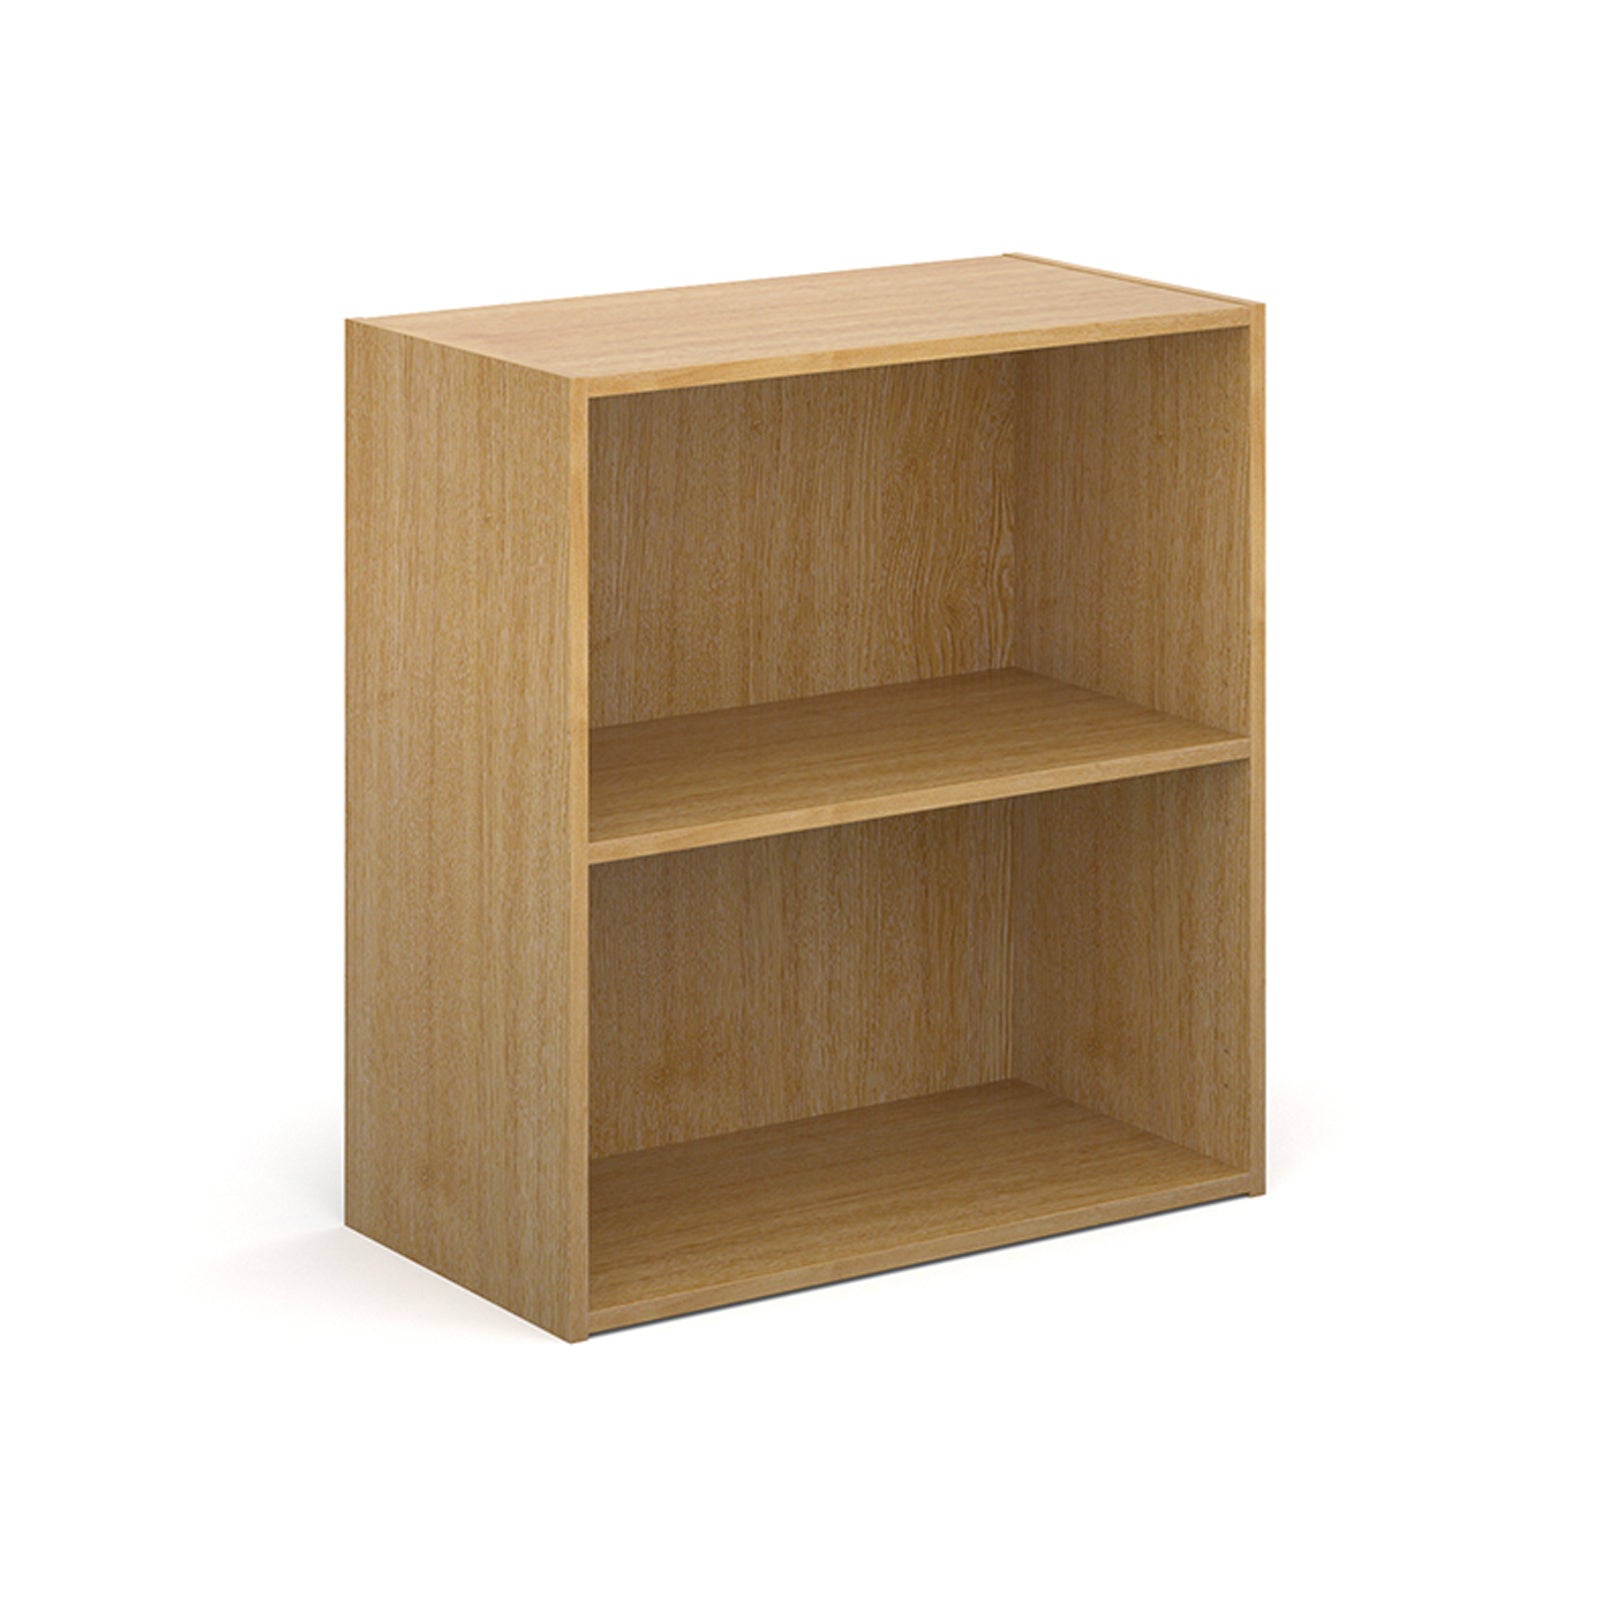 Contract One, Two, Three or Four Shelf 756mm Wide Bookcase